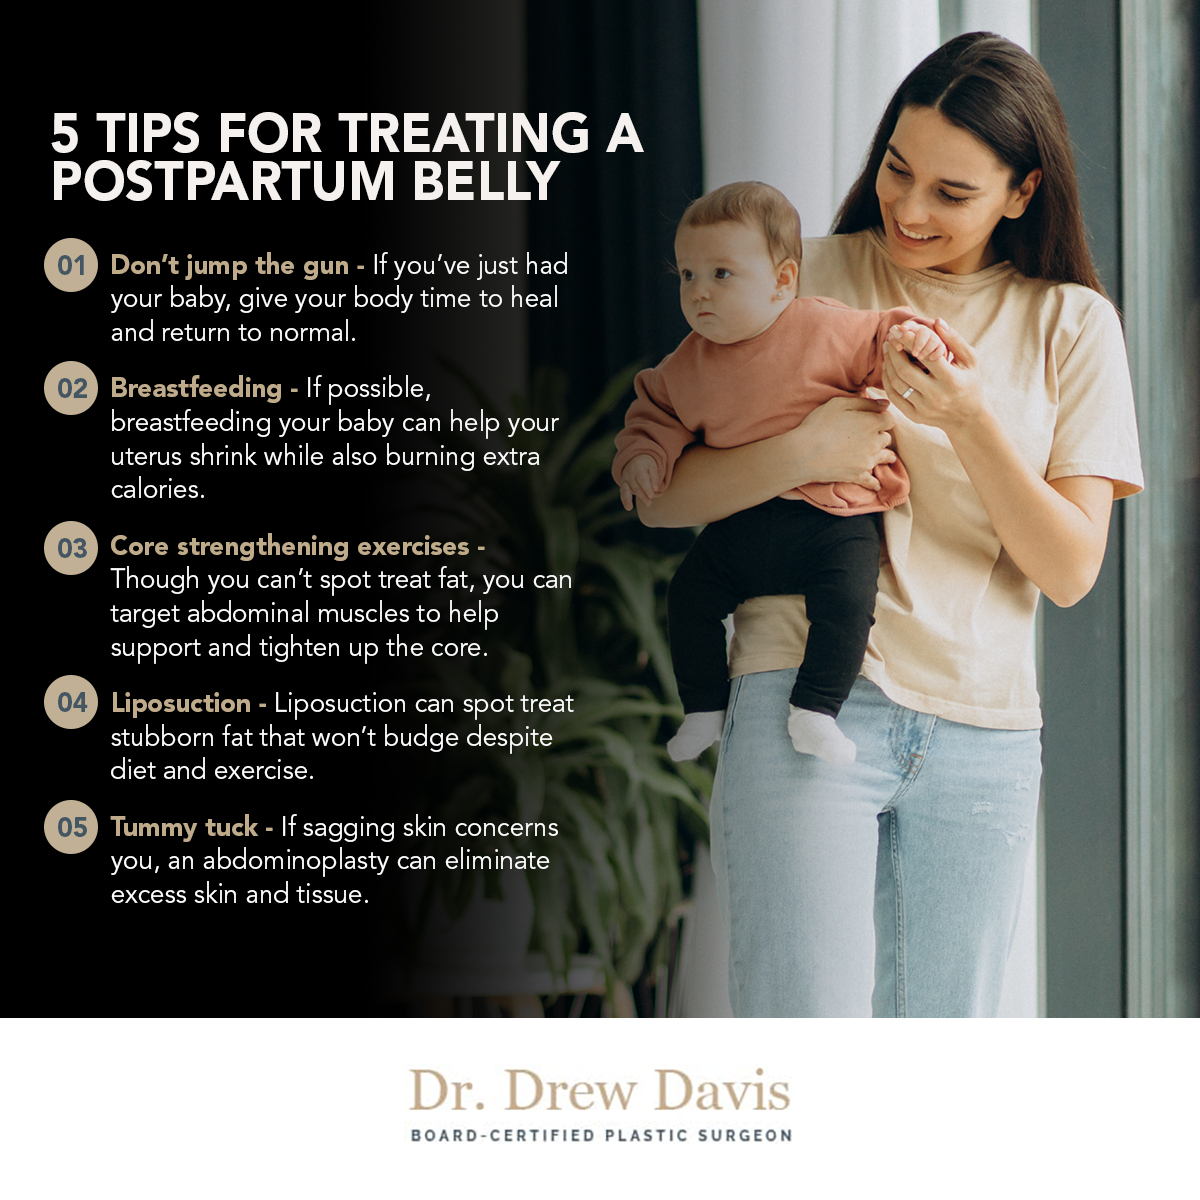 5 Tips for Treating a Postpartum Belly